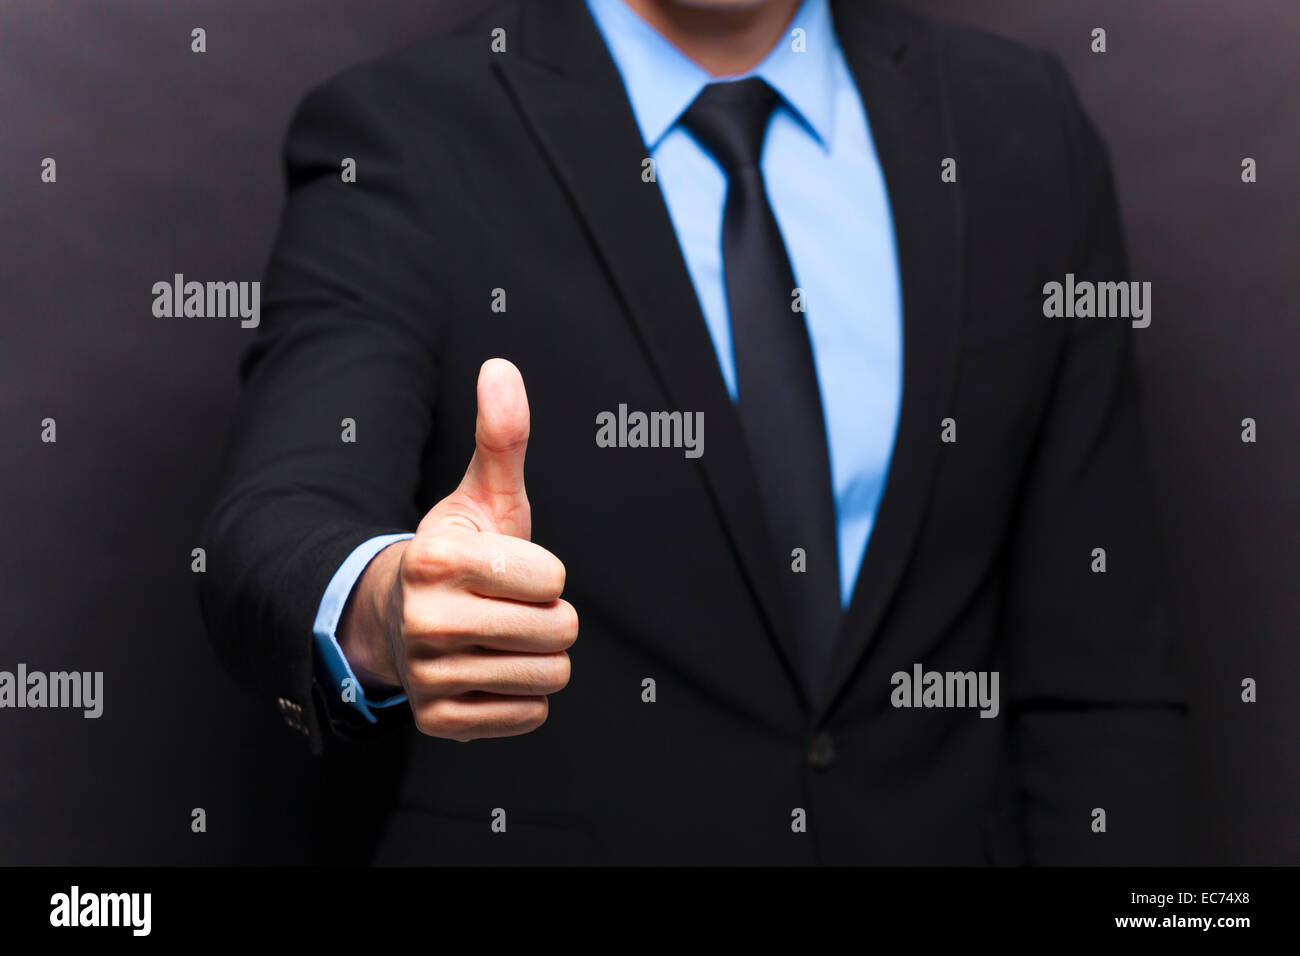 Businessman showing thumbs up sign Stock Photo